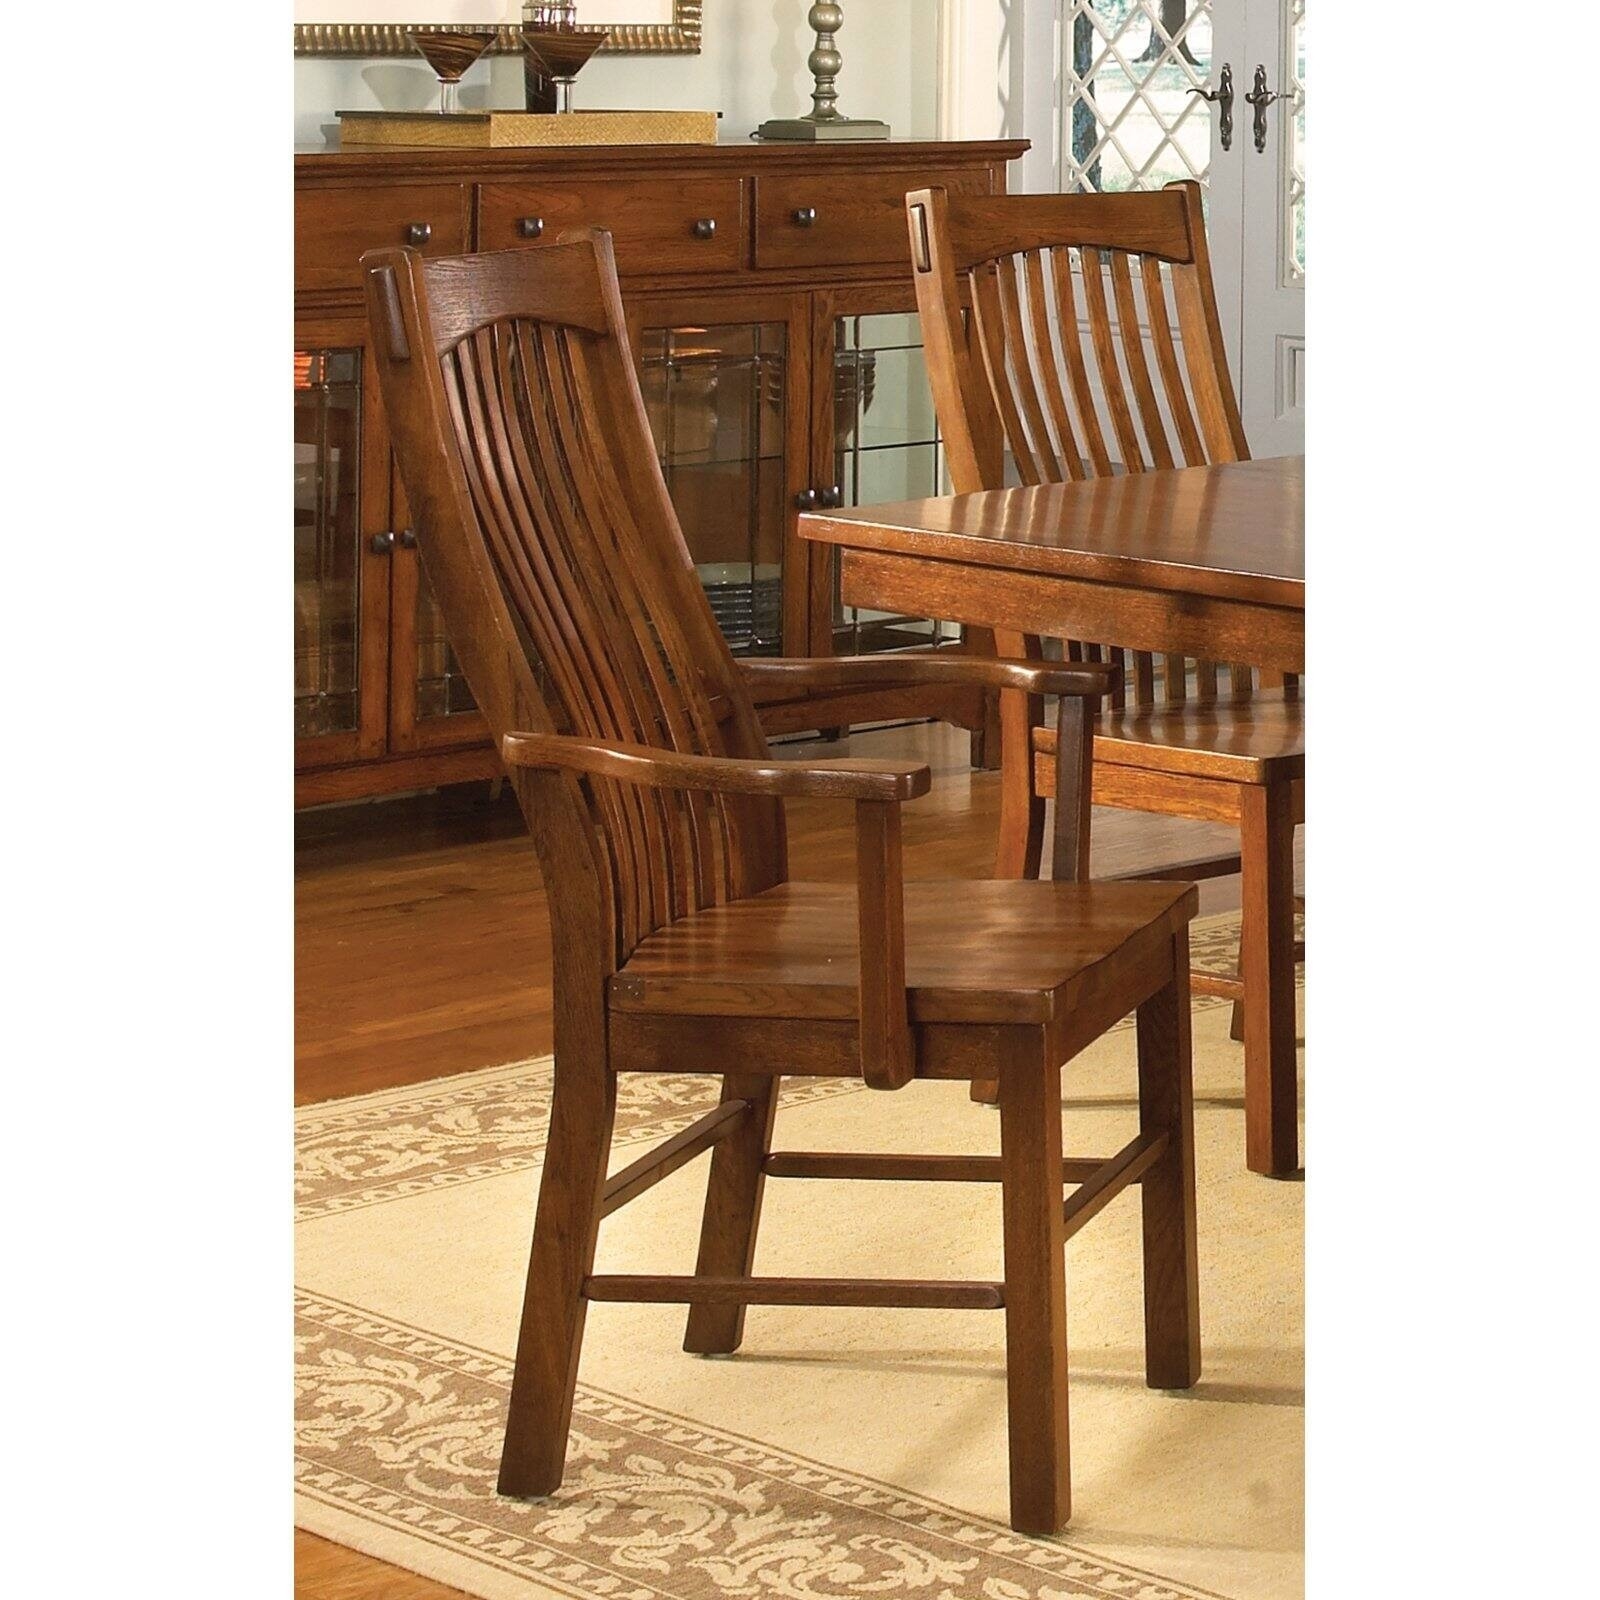 Wooden Chairs With Arms - Foter